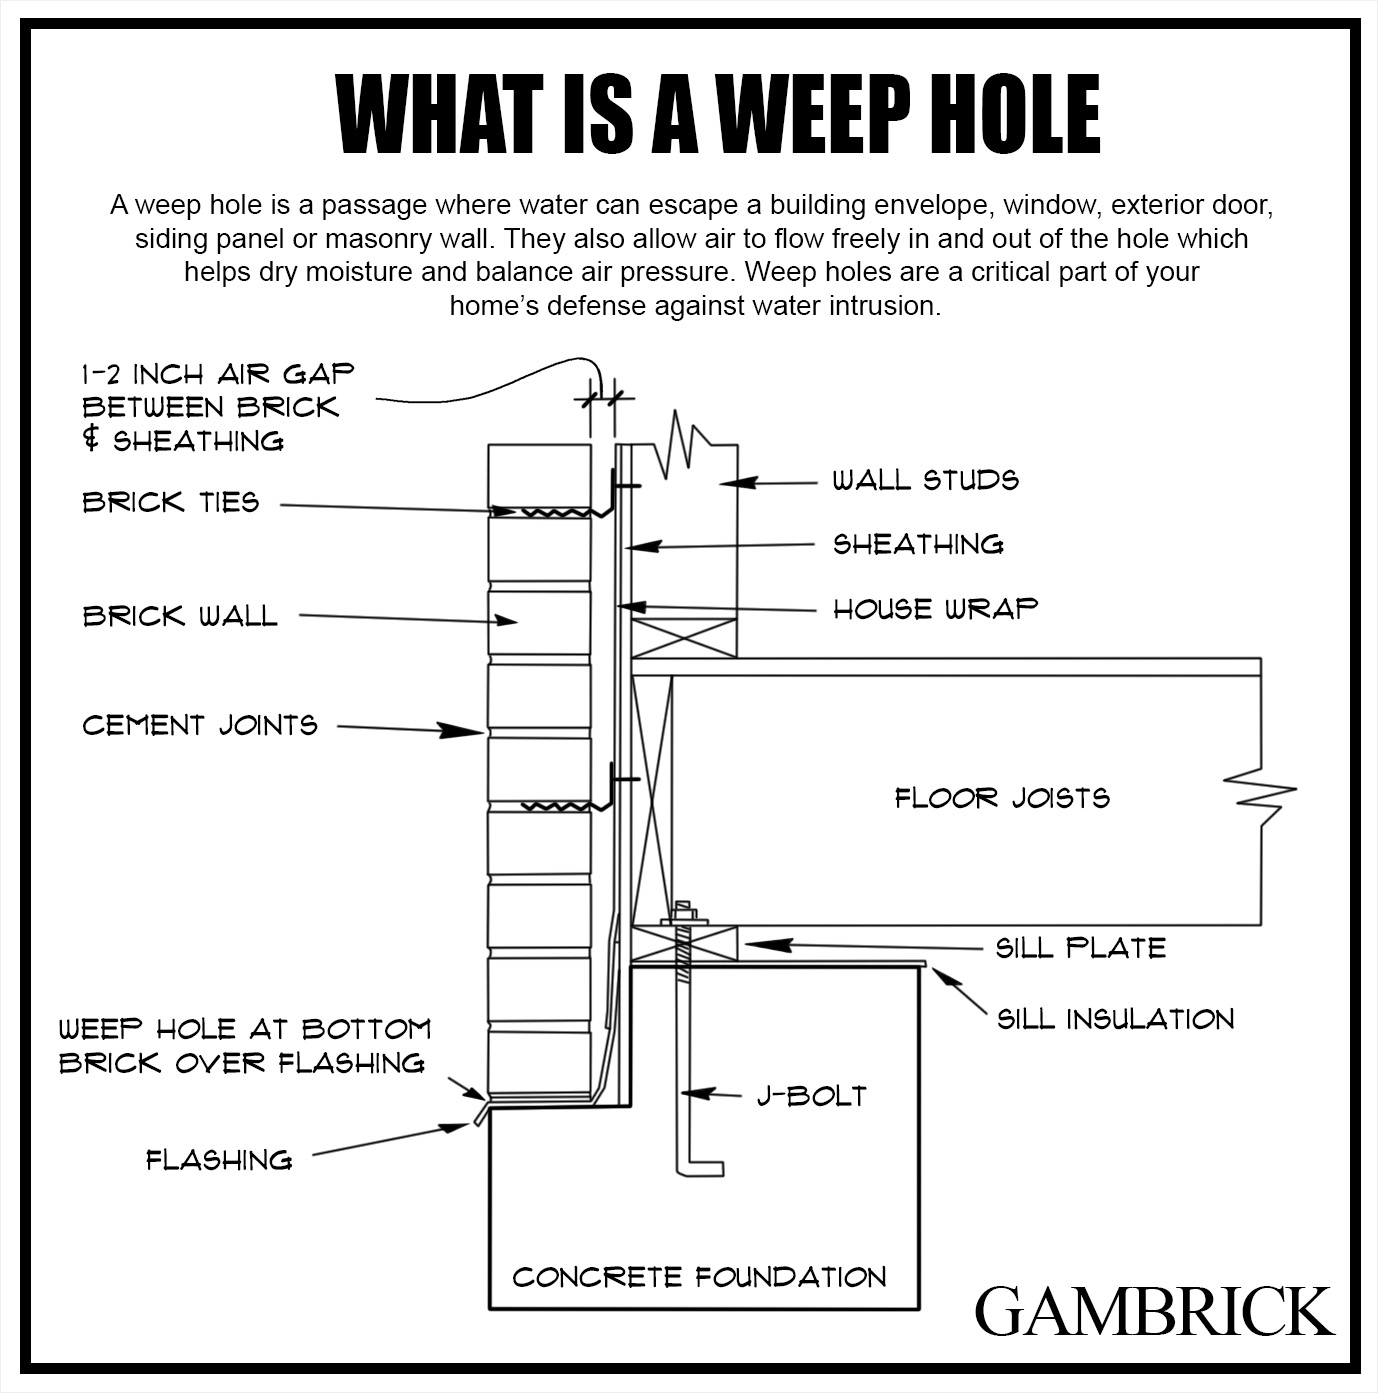 what is a weep hole infographic chart 1.0